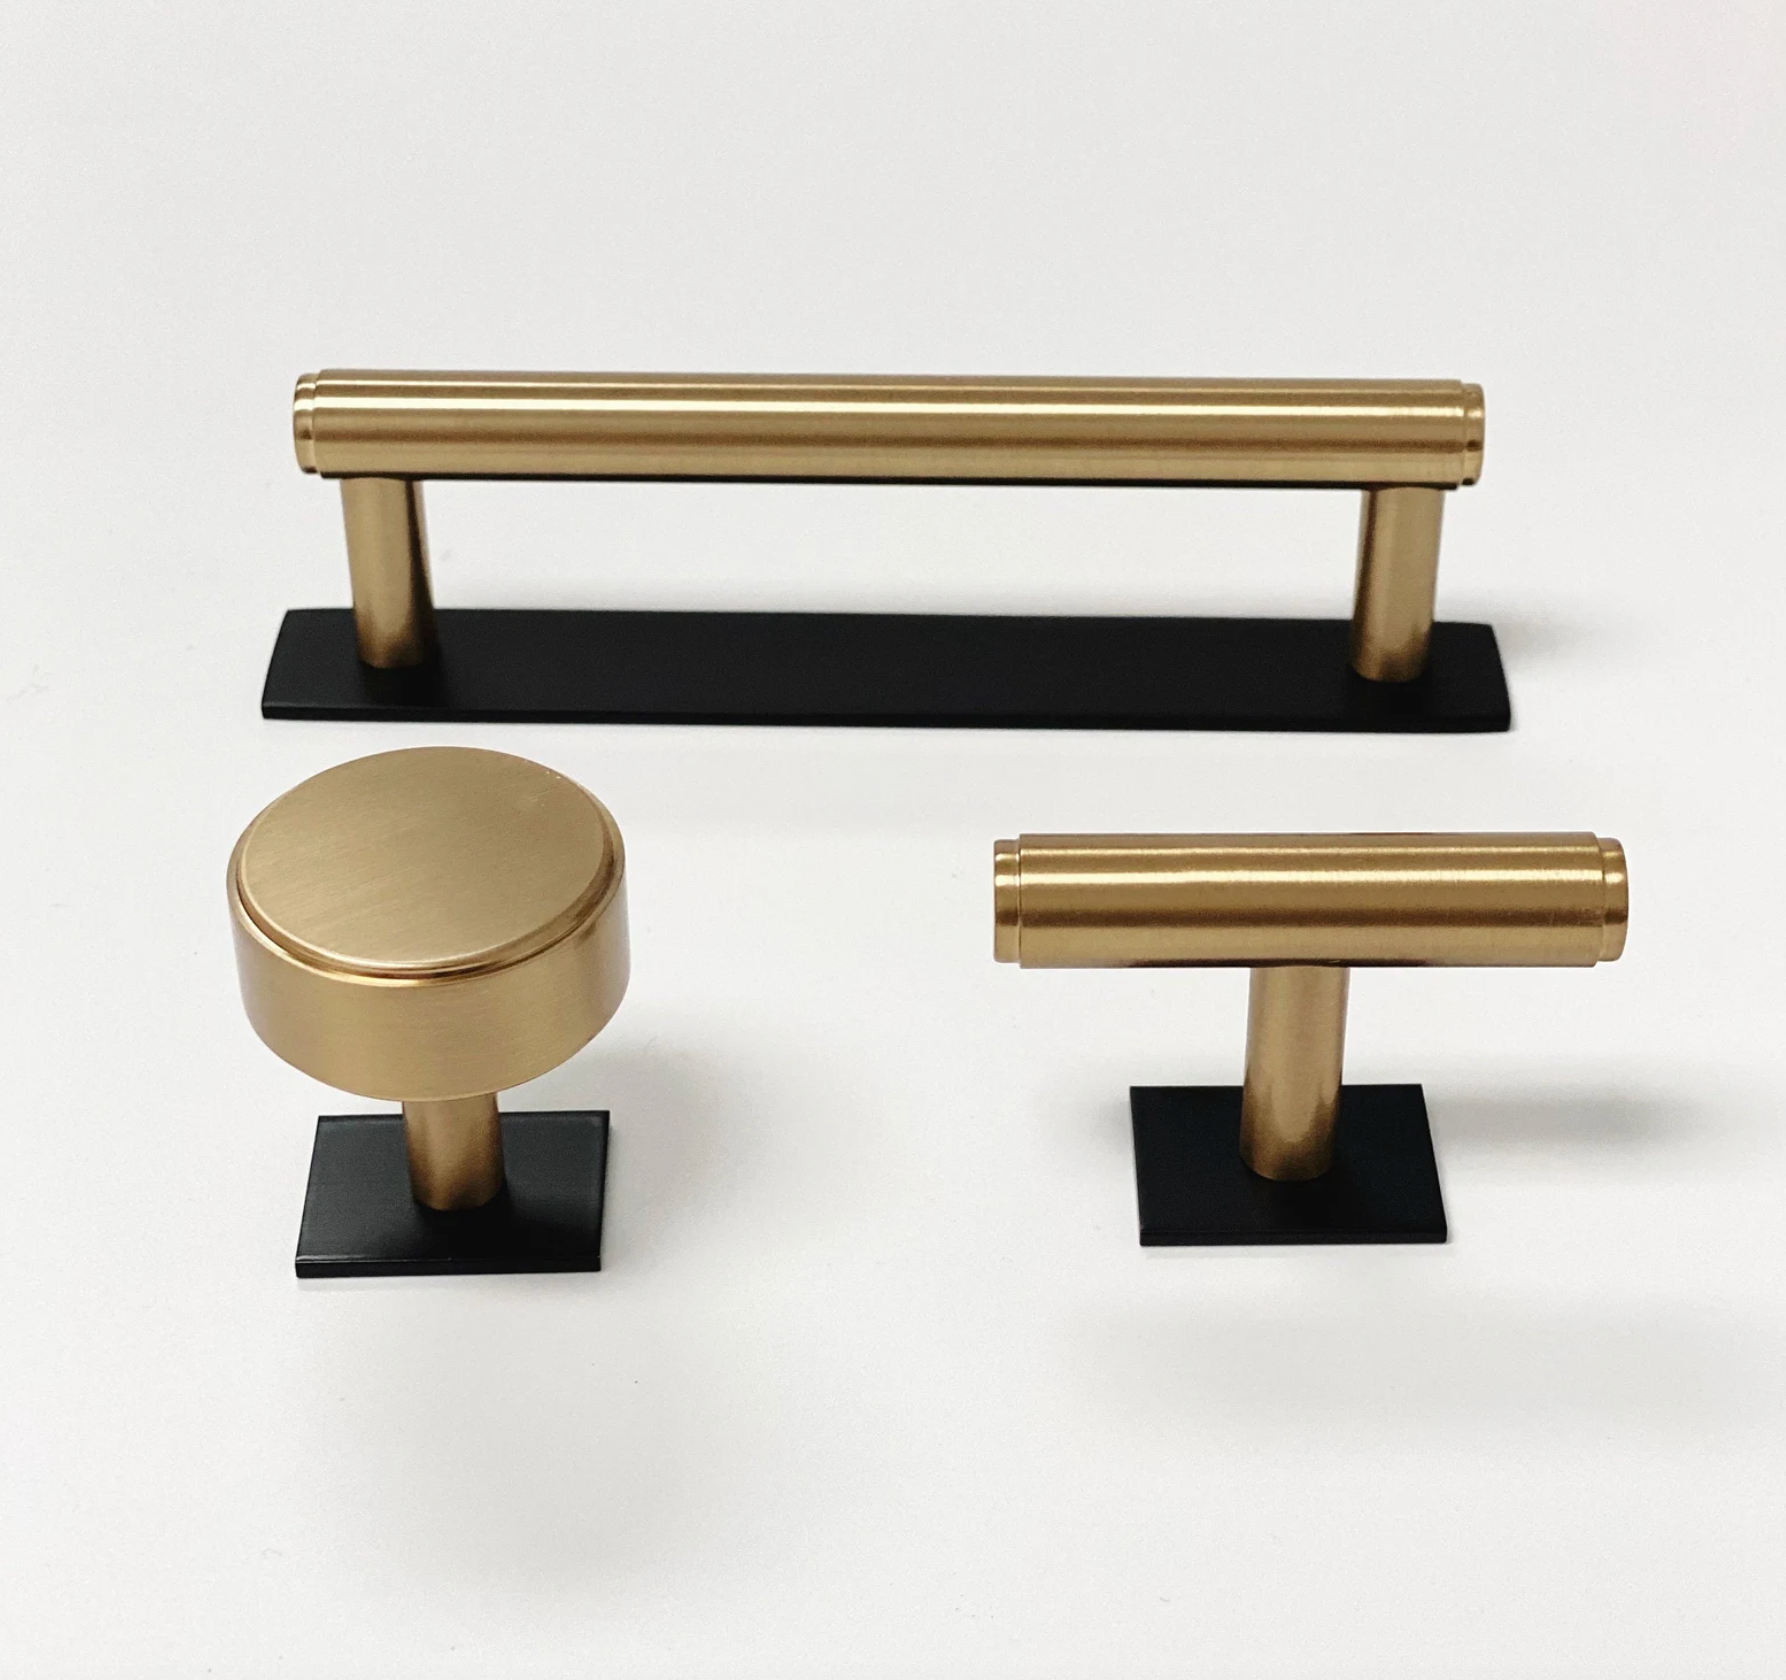 Dual Finish "Maison No. 2" Smooth Matte Black and Champagne Bronze Drawer Pulls and Cabinet Knobs with Backplate - Industry Hardware